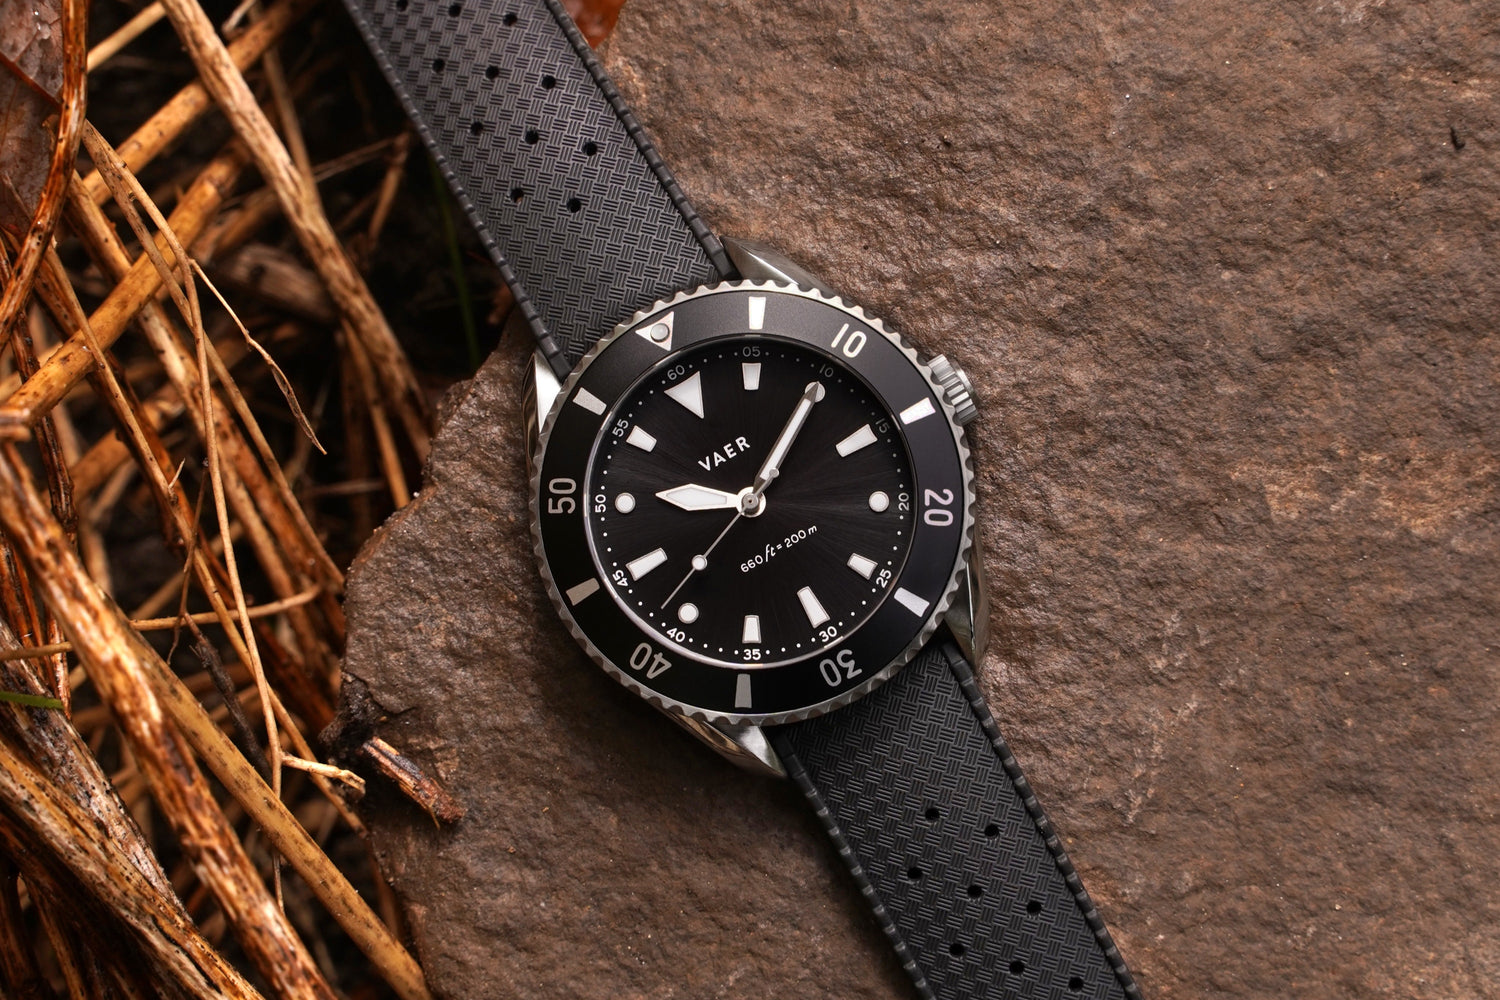 8 Key Features of Vaer Solar Dive Watches